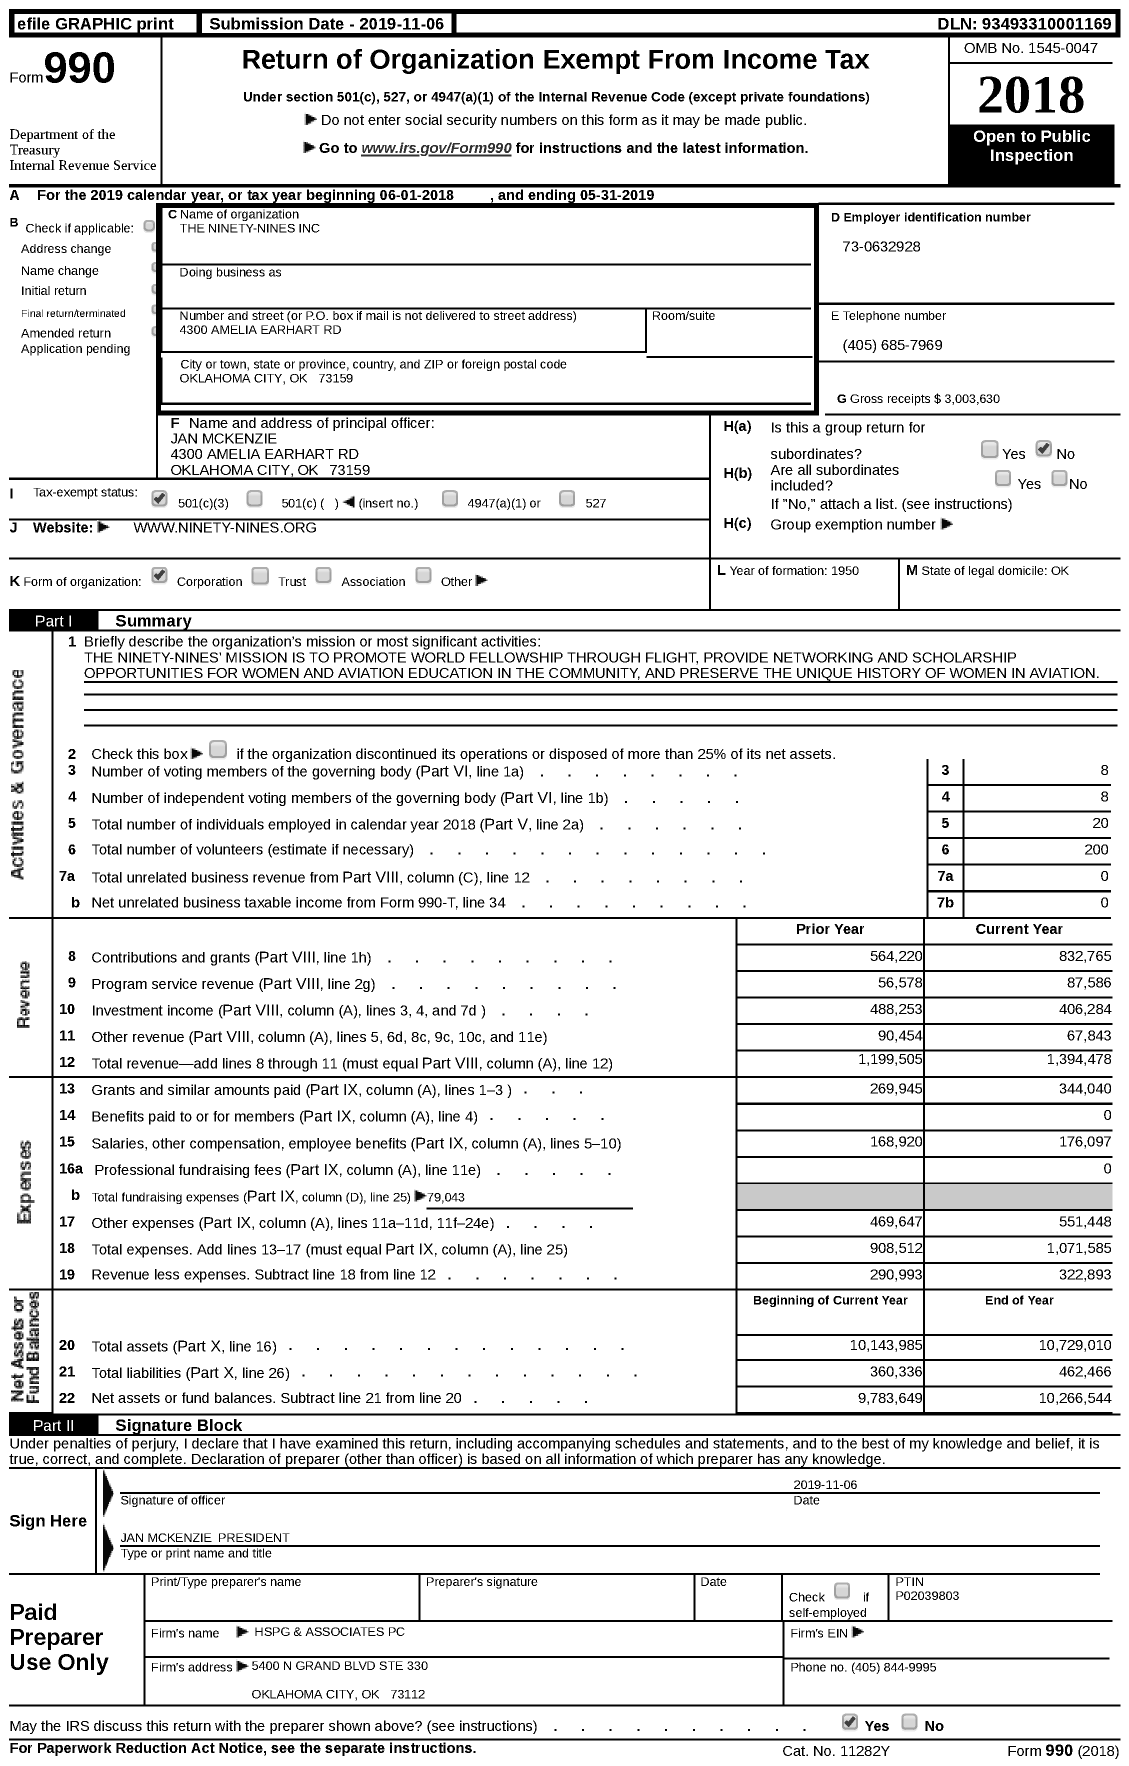 Image of first page of 2018 Form 990 for The Ninety-Nines